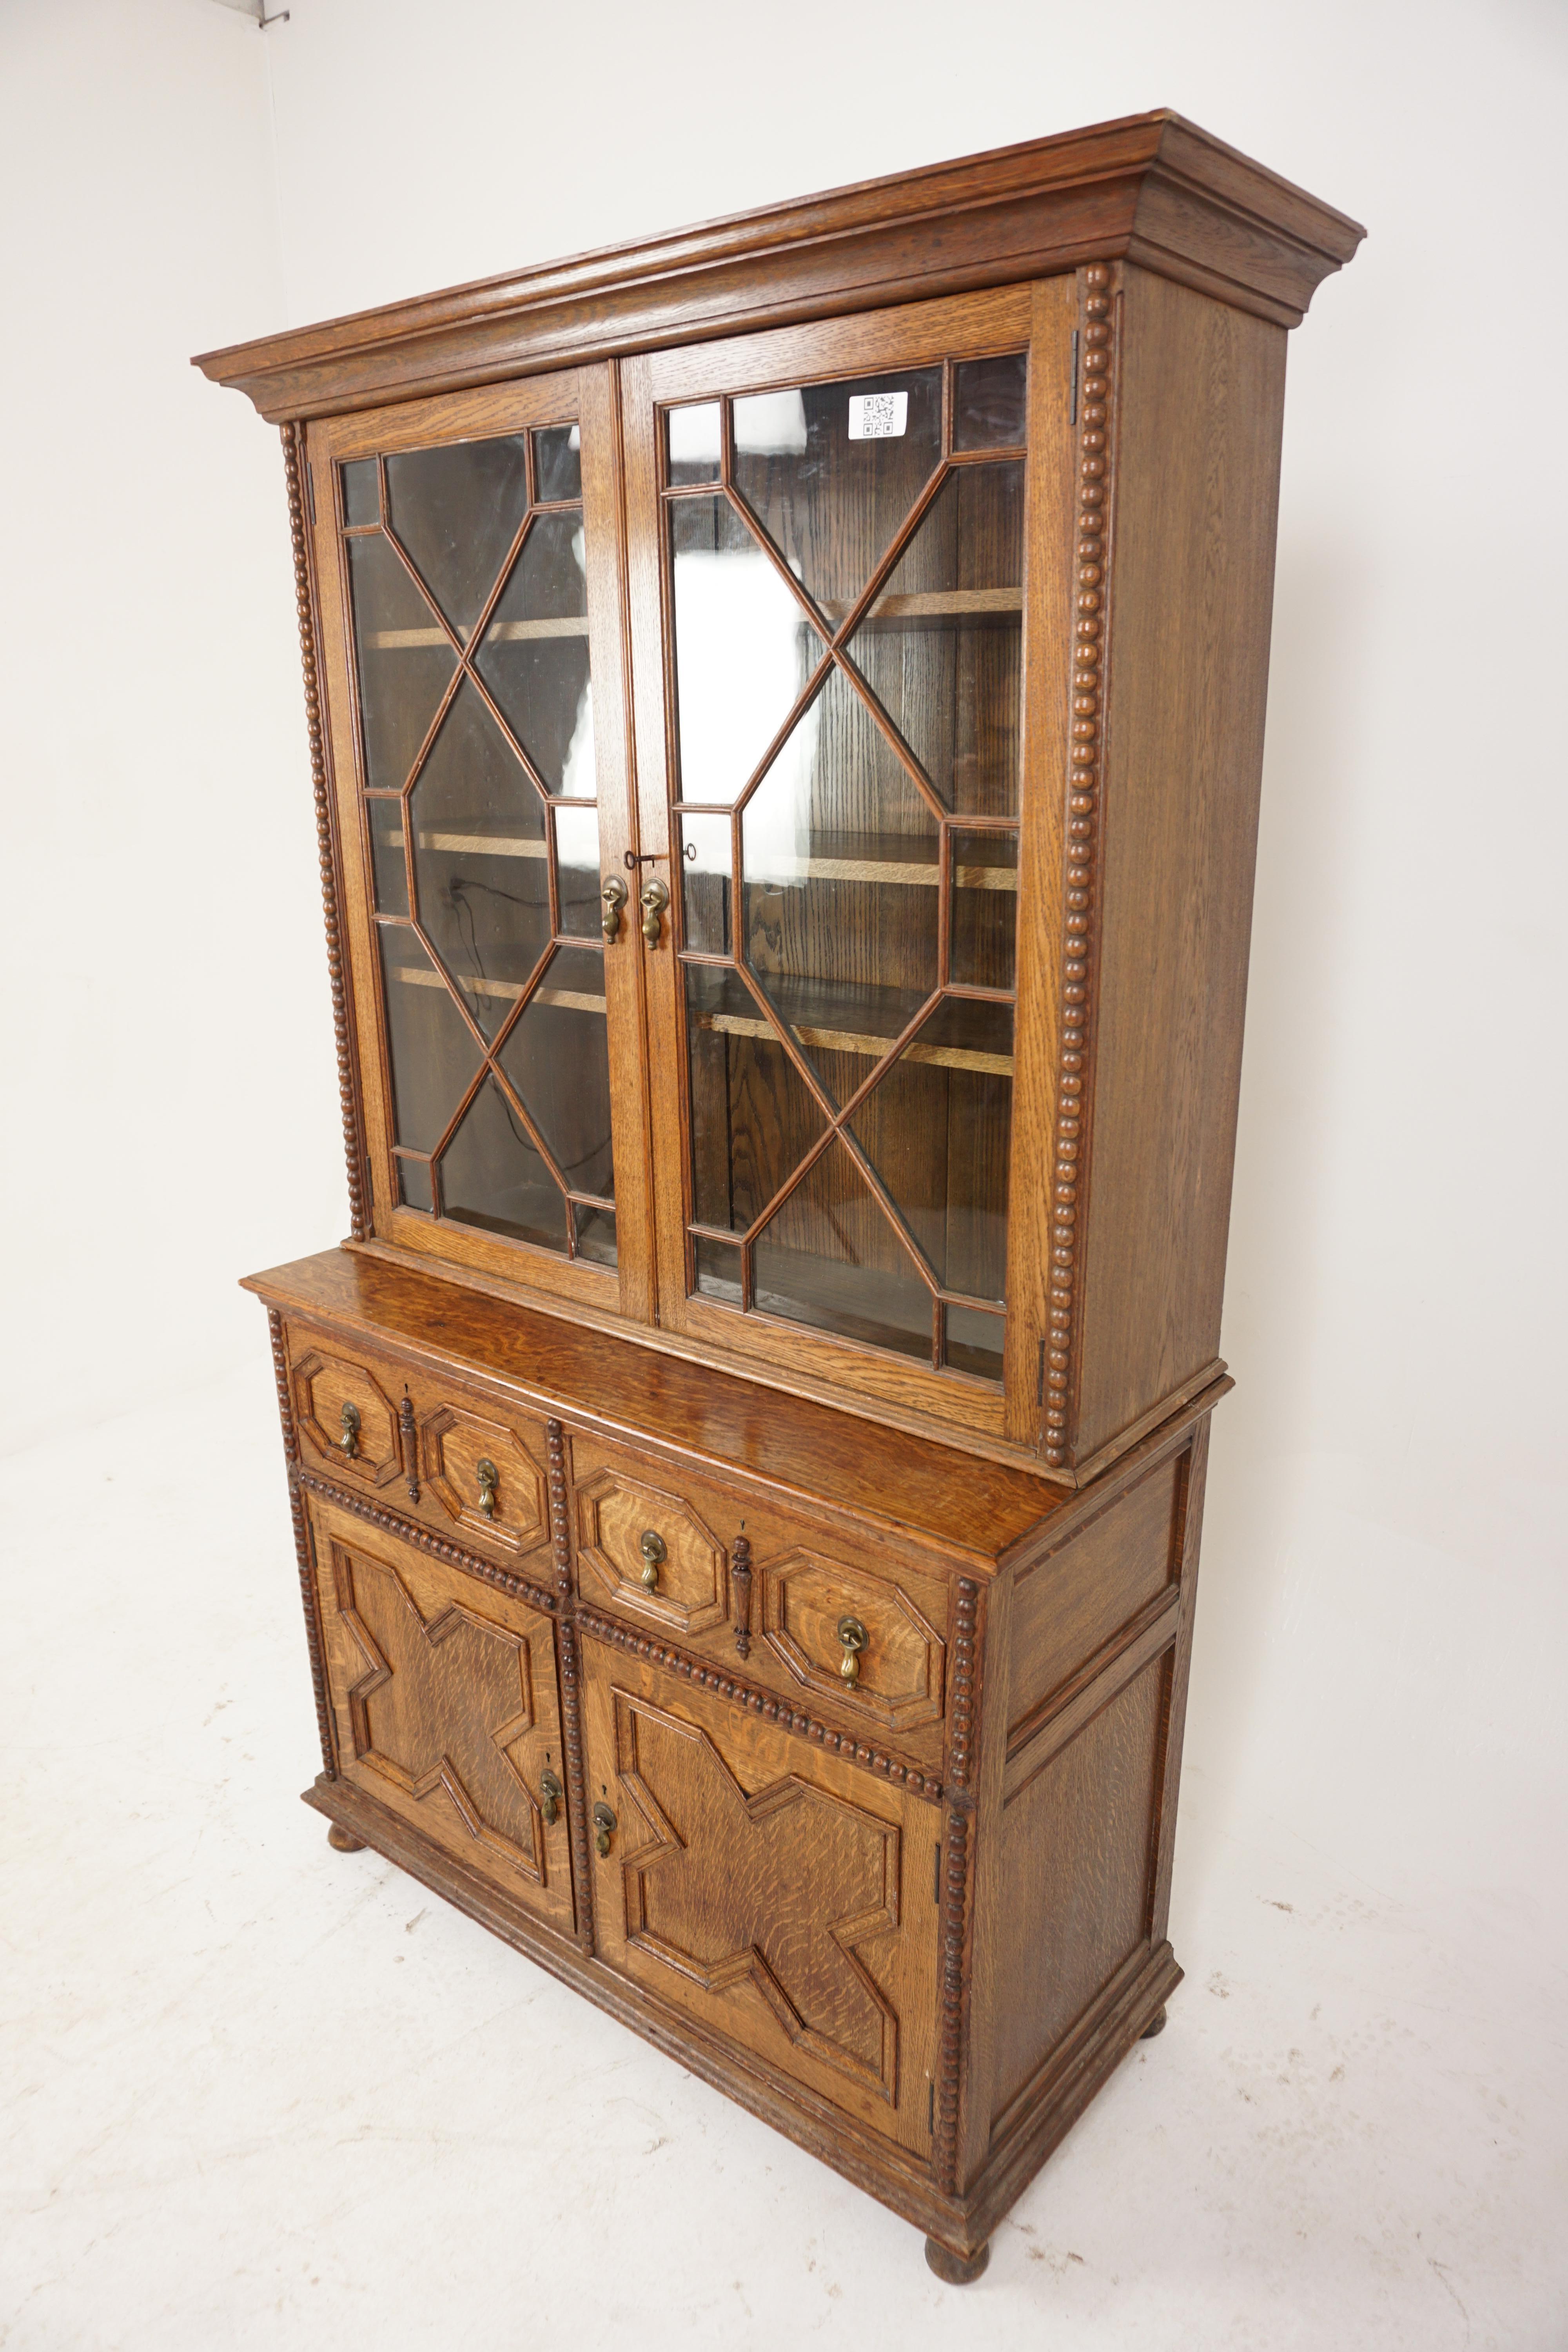 Antique Victorian Oak Cabinet Bookcase, Display Cabinet, “John Taylor Edinburg”, Scotland 1890, H961

Scotland 1890
Solid Oak
Original Finish
Moulded Cornice on Top
Pair of astragal with thirteen panes of glass.
Molding on the doors
Open to